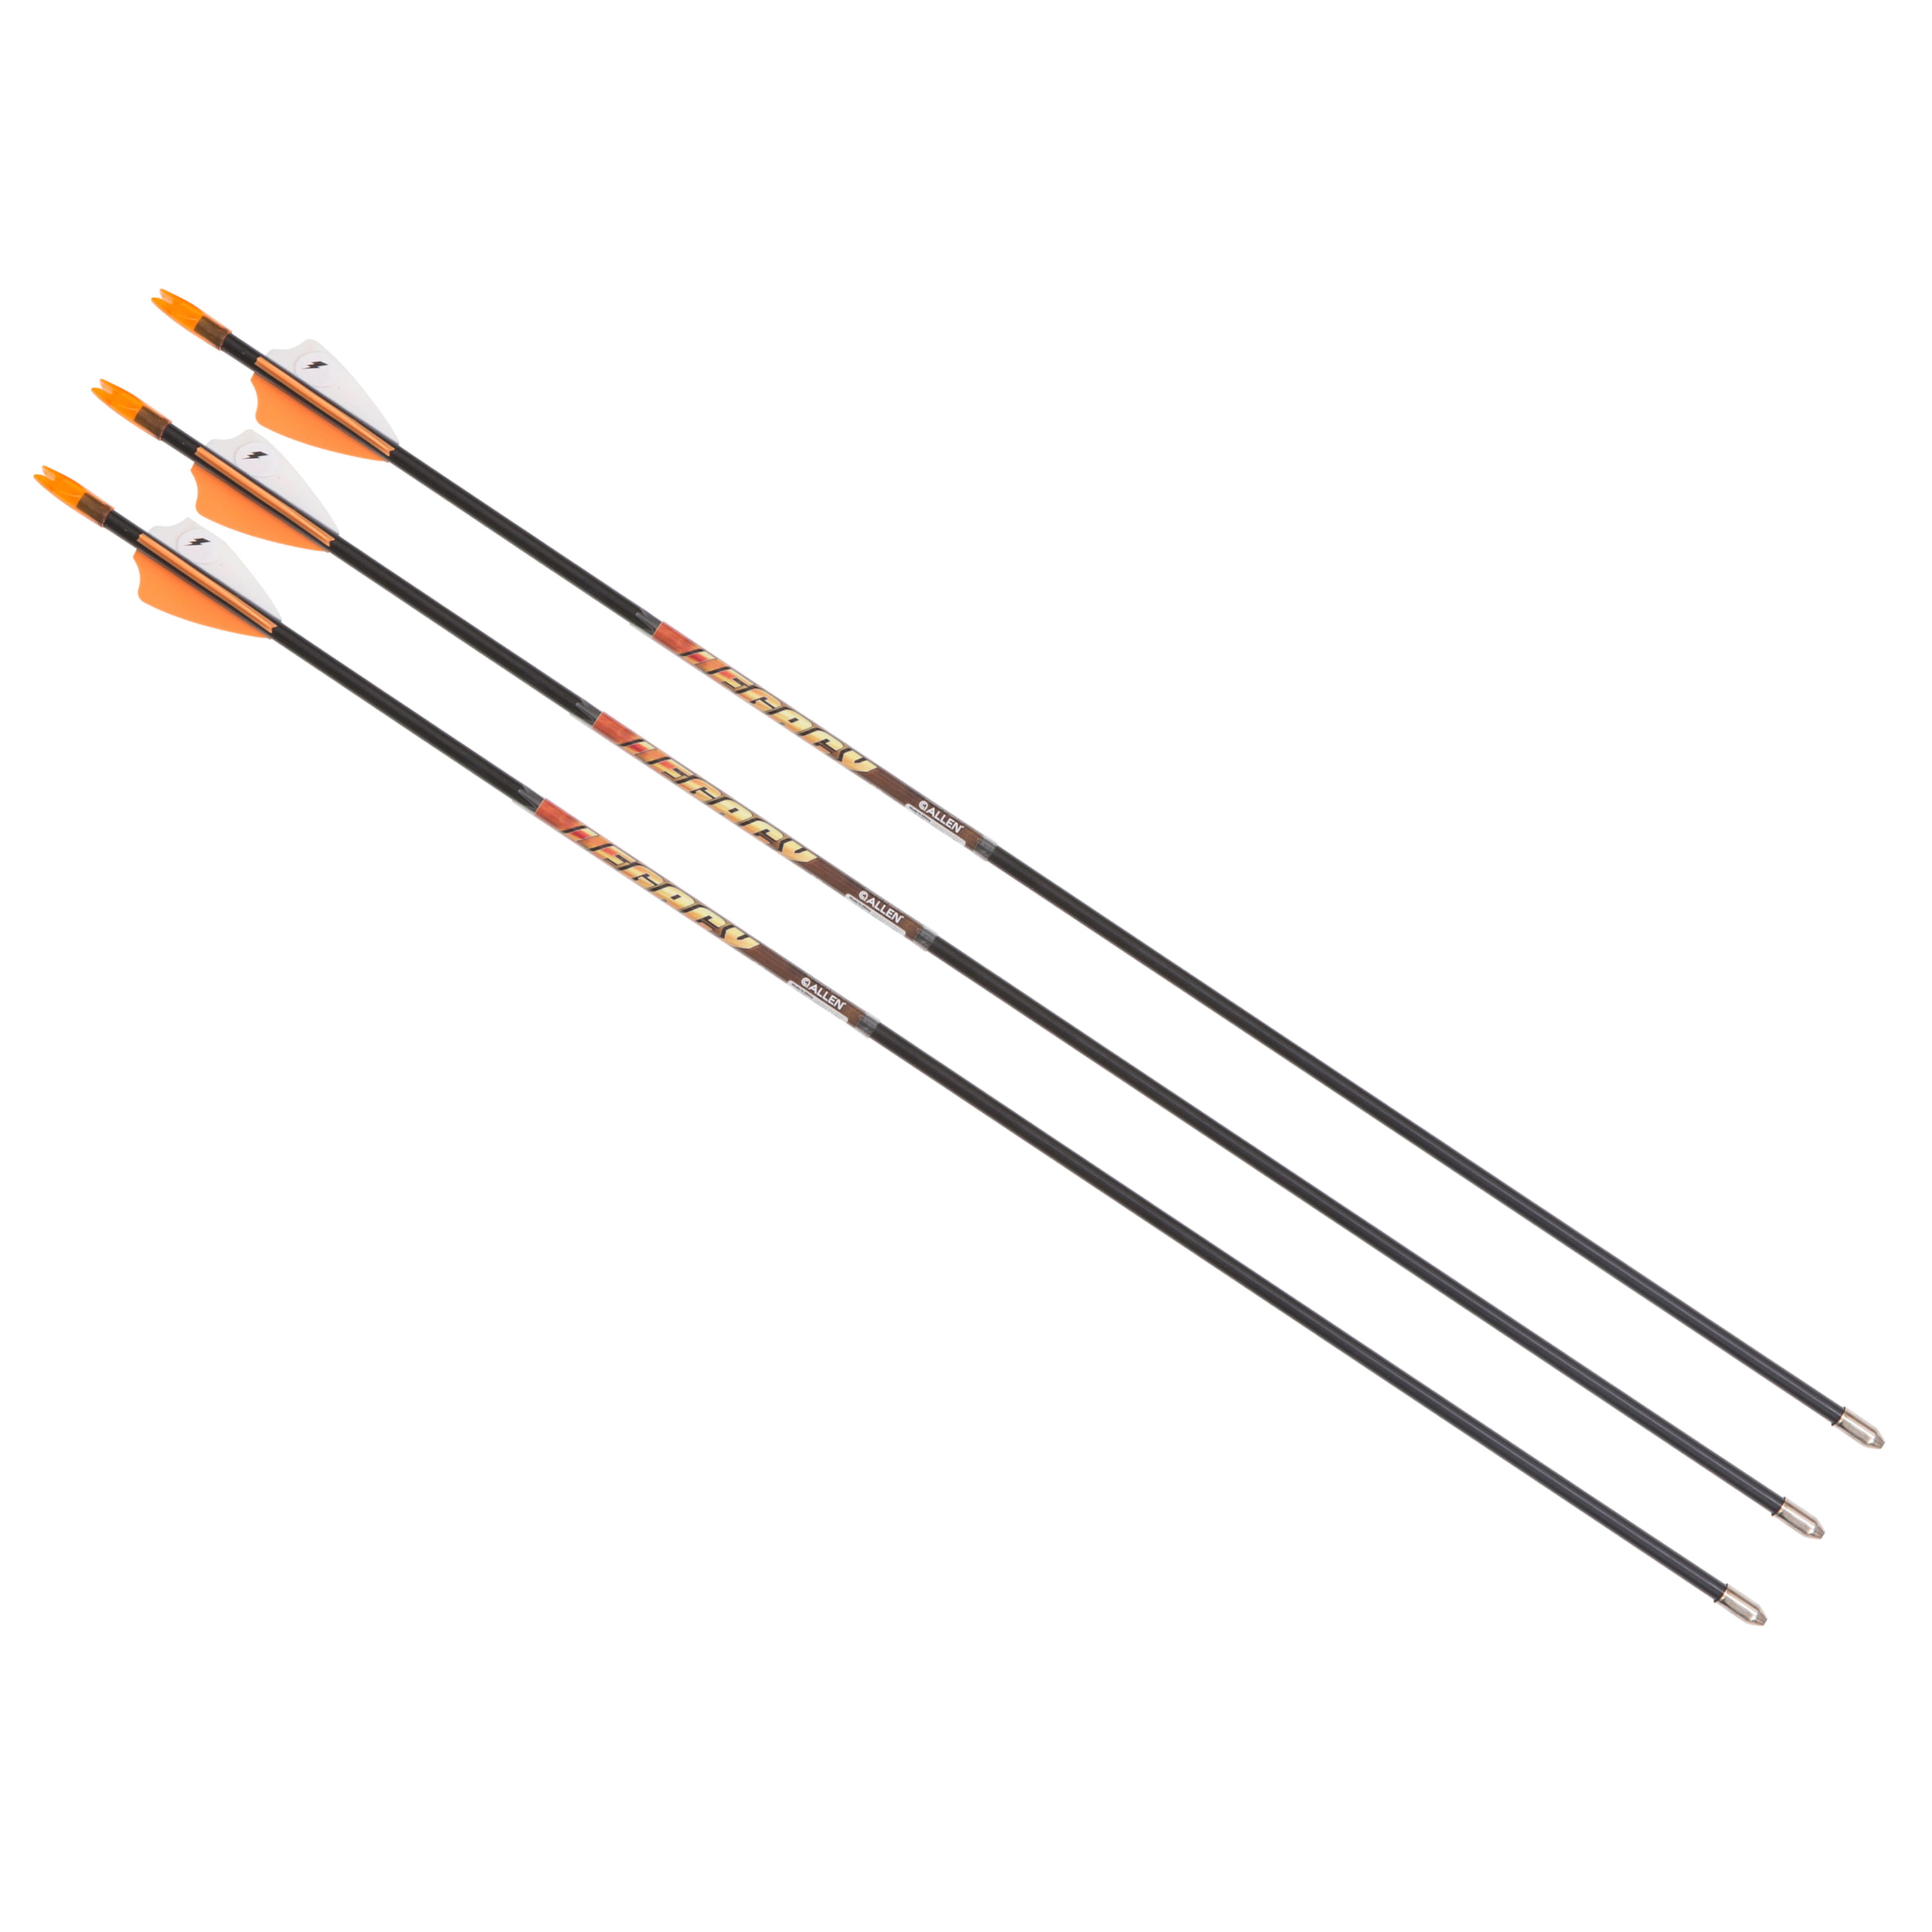 93328 28 Multi Allen Company Knockdown Youth Carbon Arrow Pack of 3 